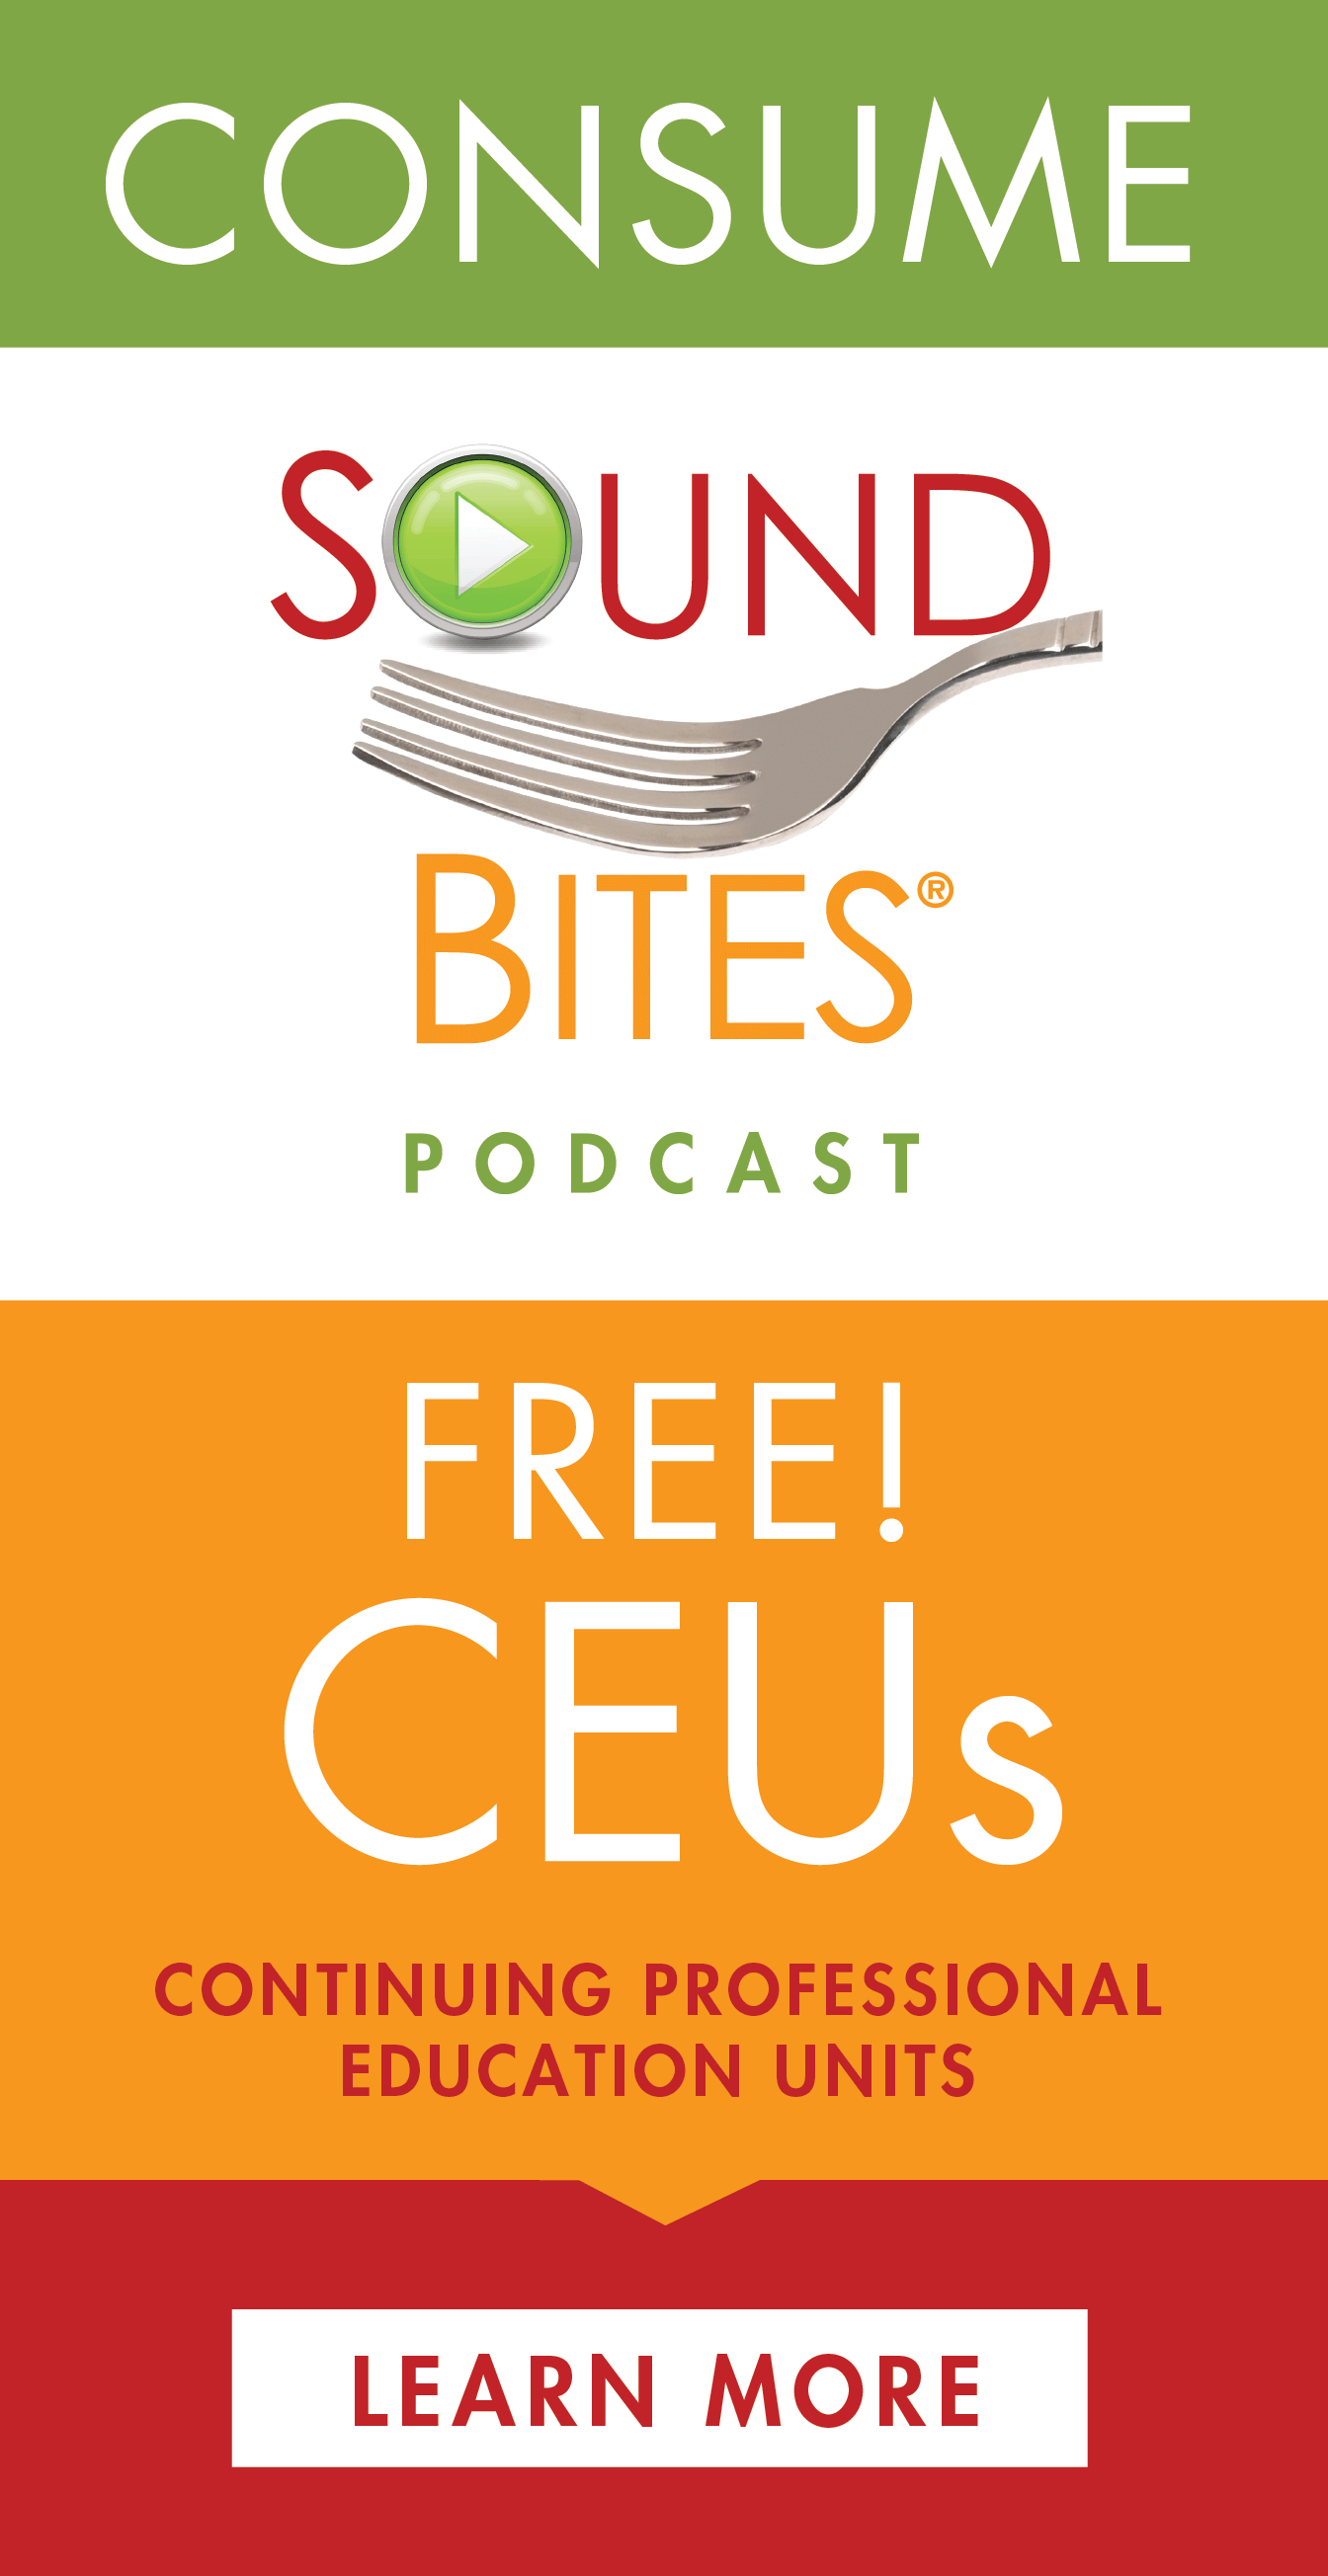 Earn Free CEUs for listening to Sound Bites Podcast select episodes